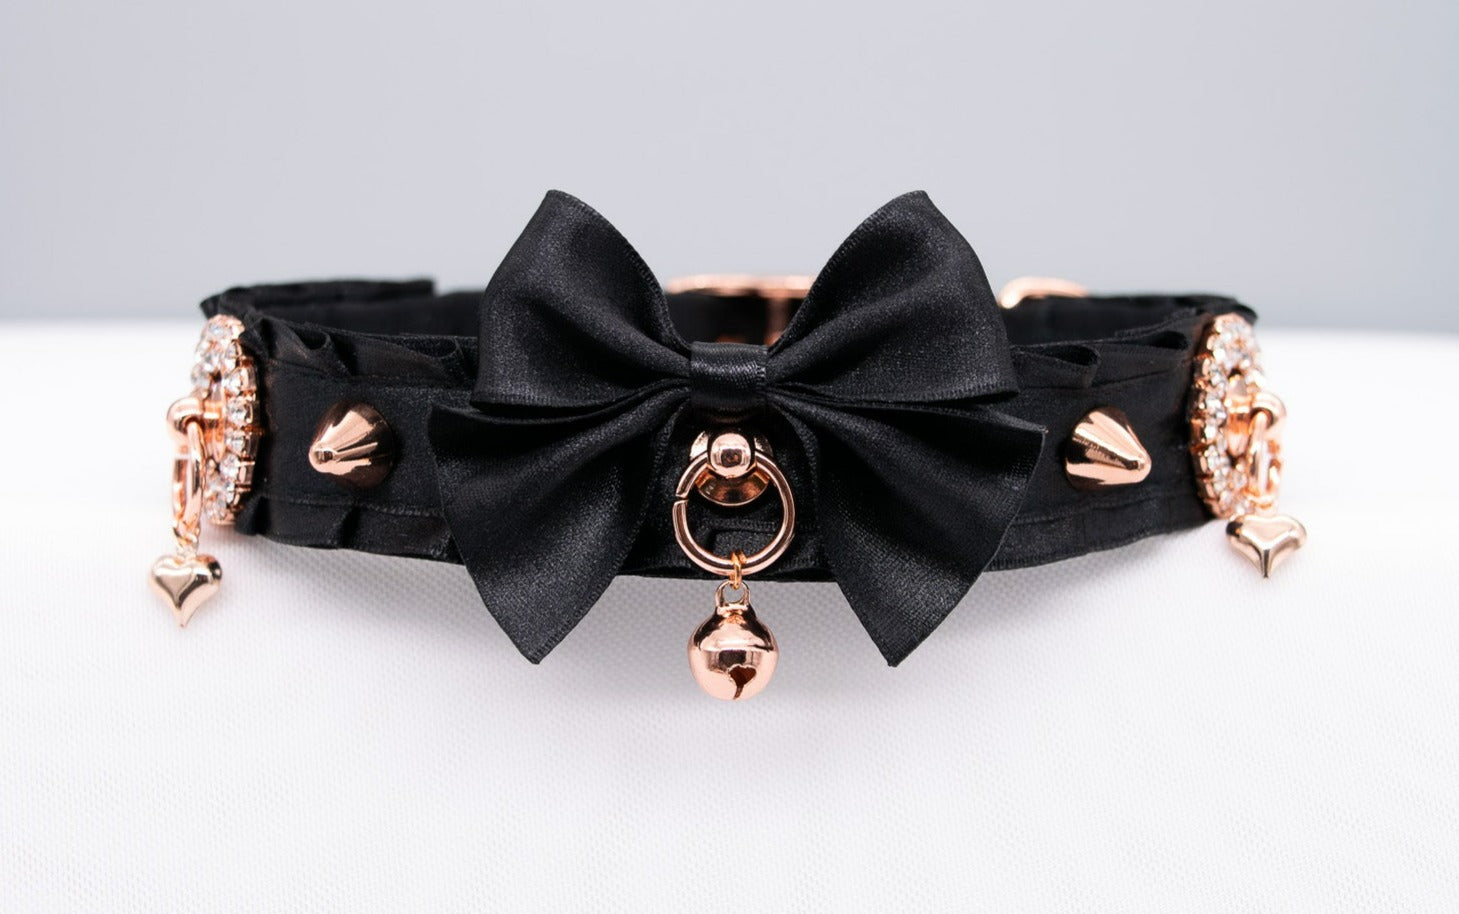 Black and Rose Gold Jeweled Spiked Pet Play Collar